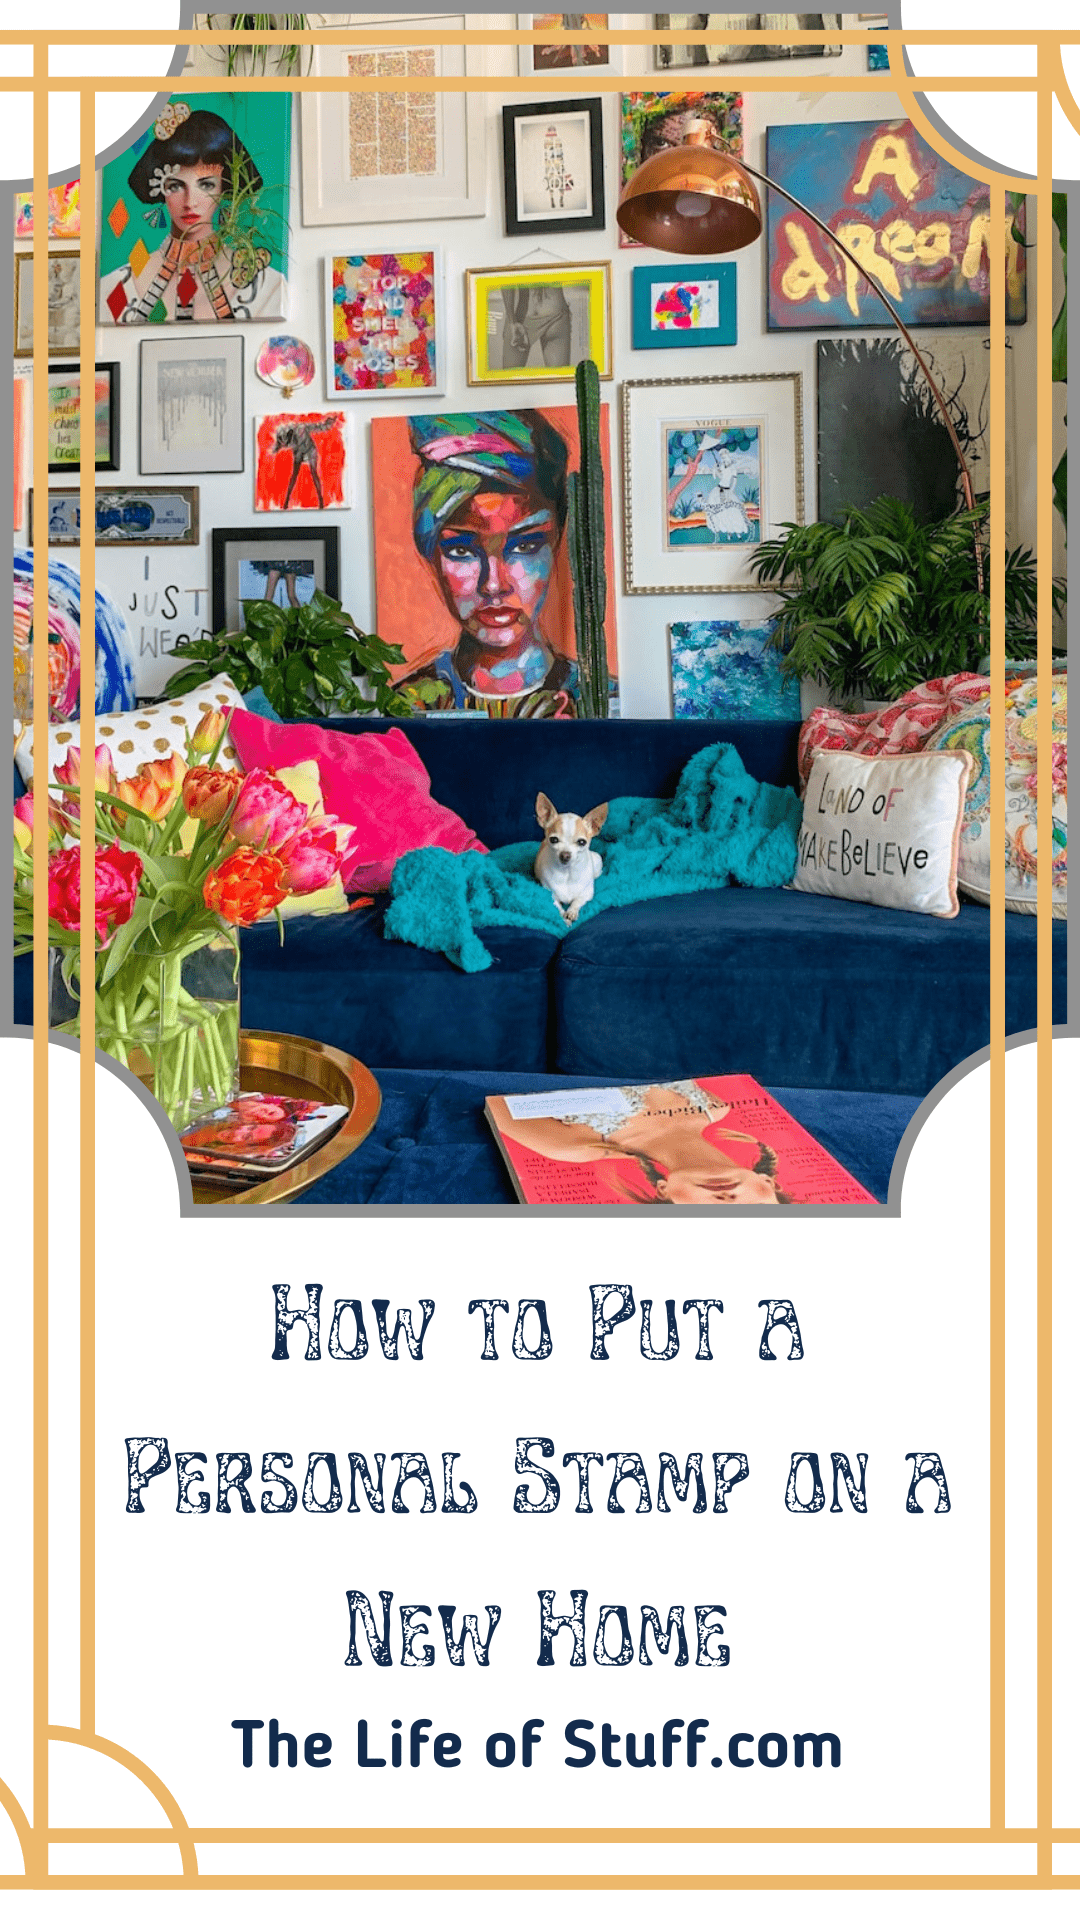 How to Put a Personal Stamp on a New Home - The Life of Stuff